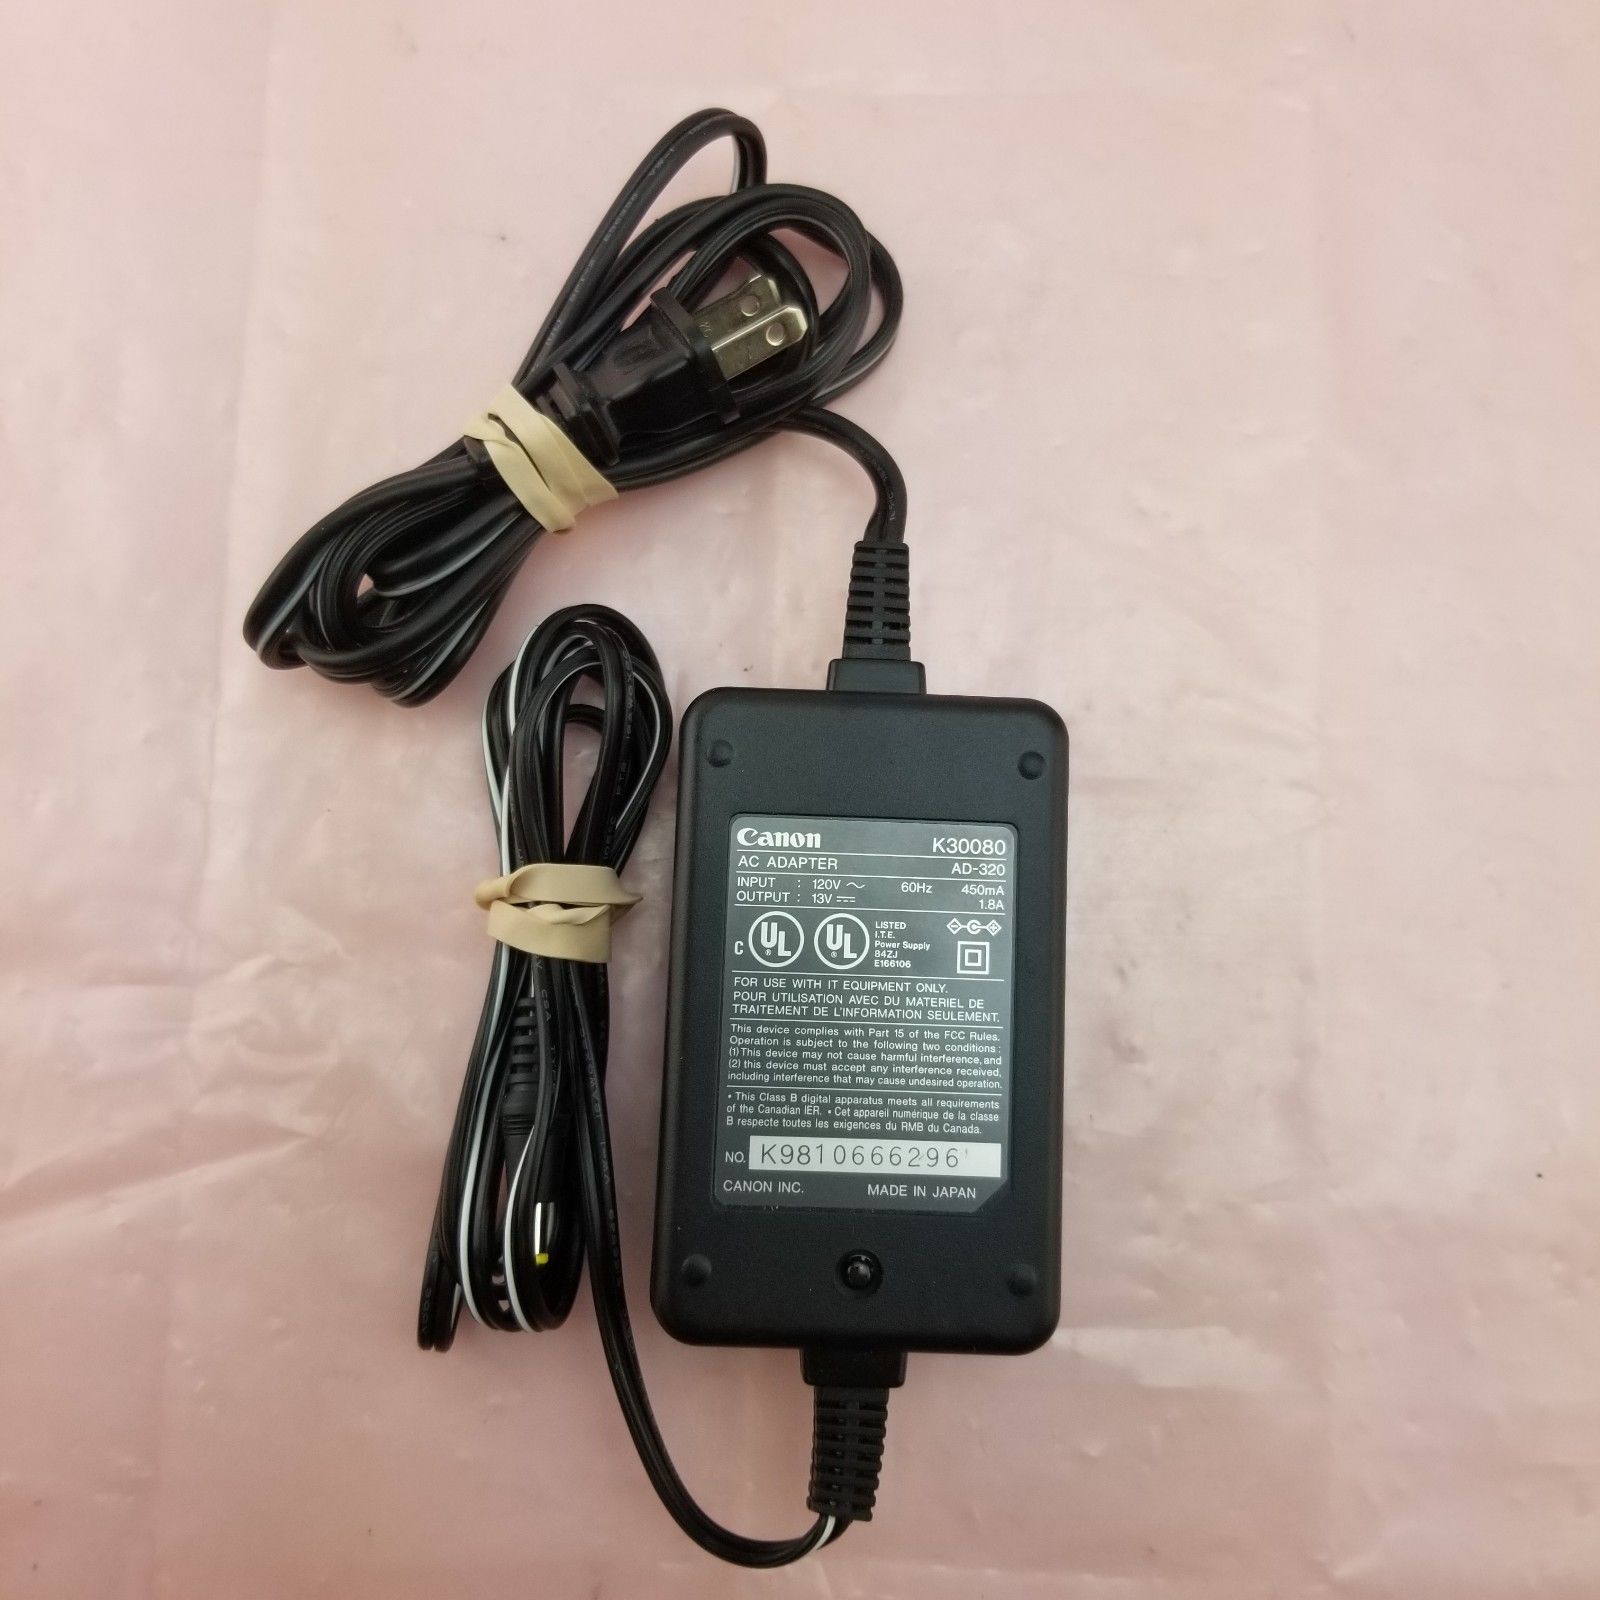 New Canon K30080 AD-320 13V 1.8A Charger Power AC Adapter Cord